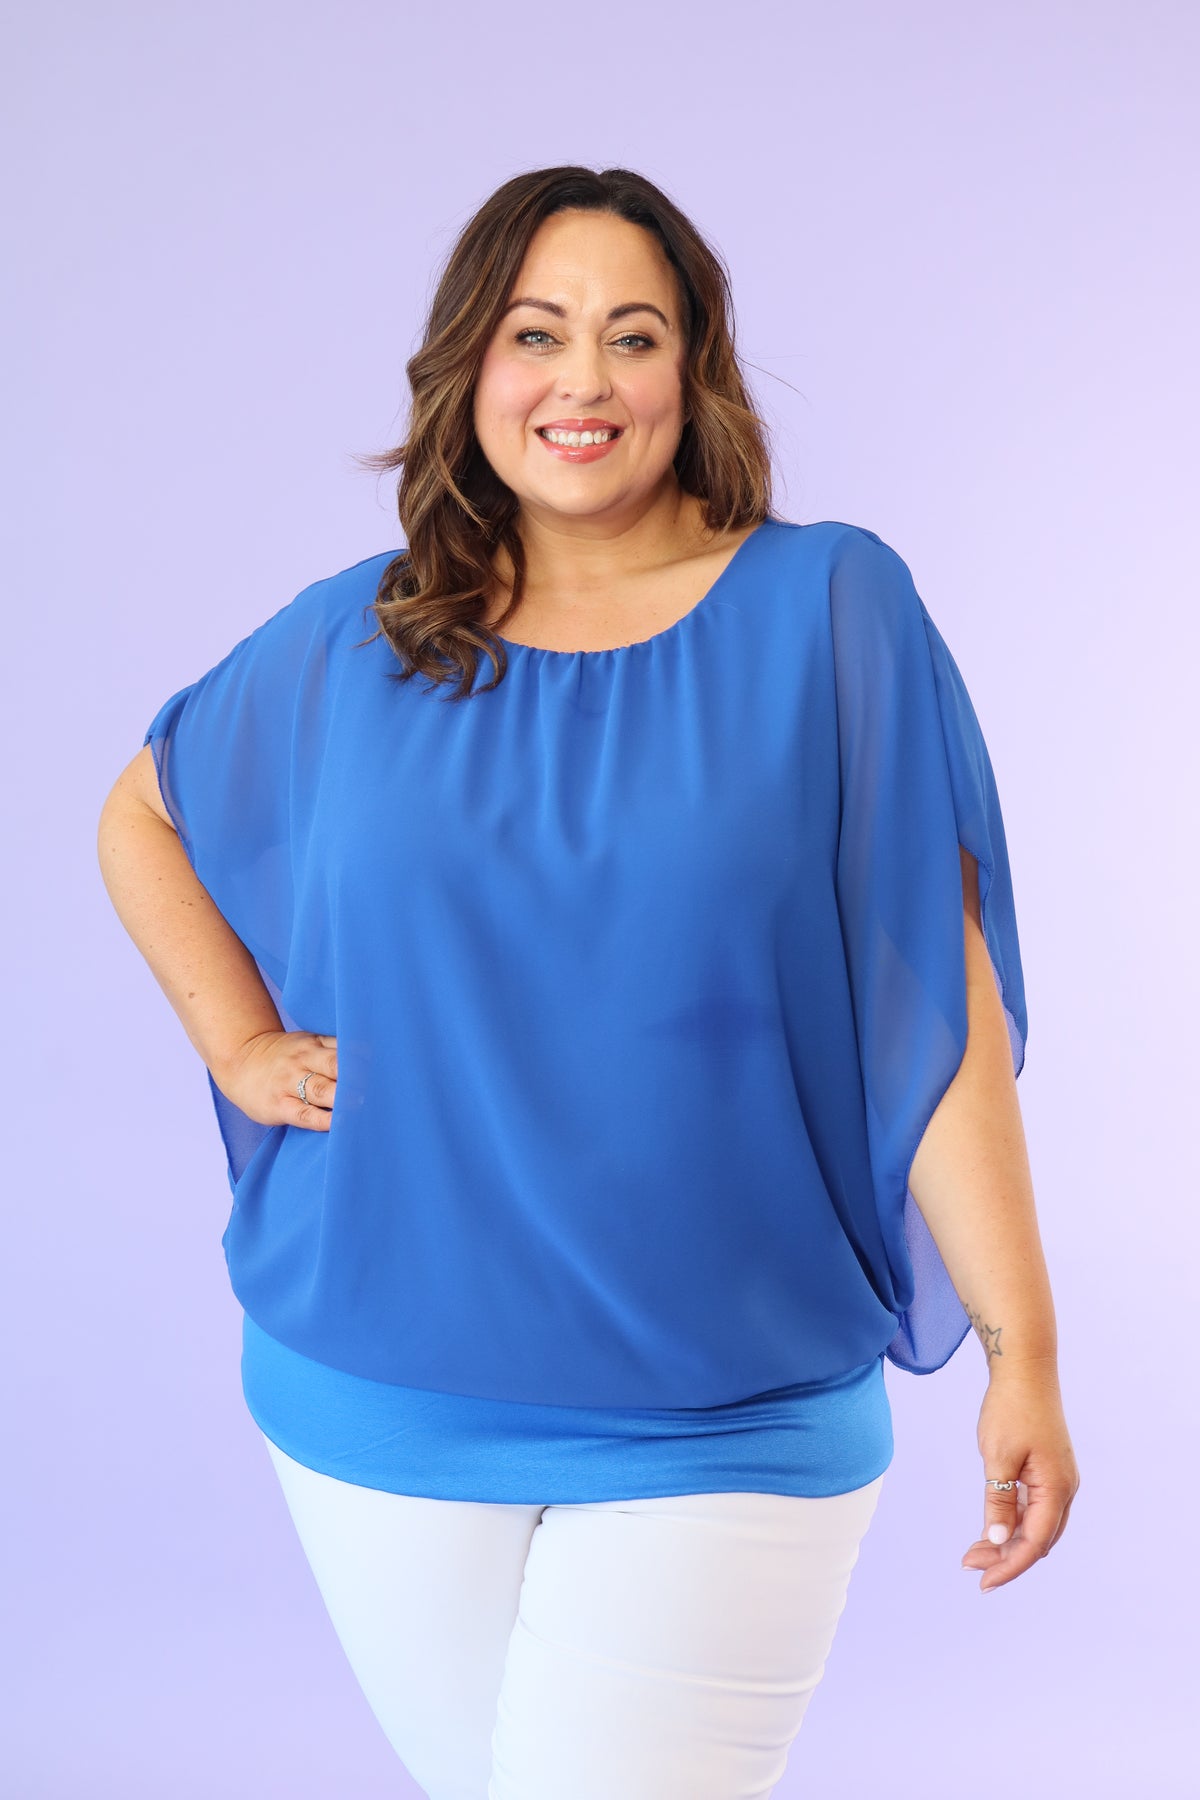 Magic Blouse in Royal Blue Size 2